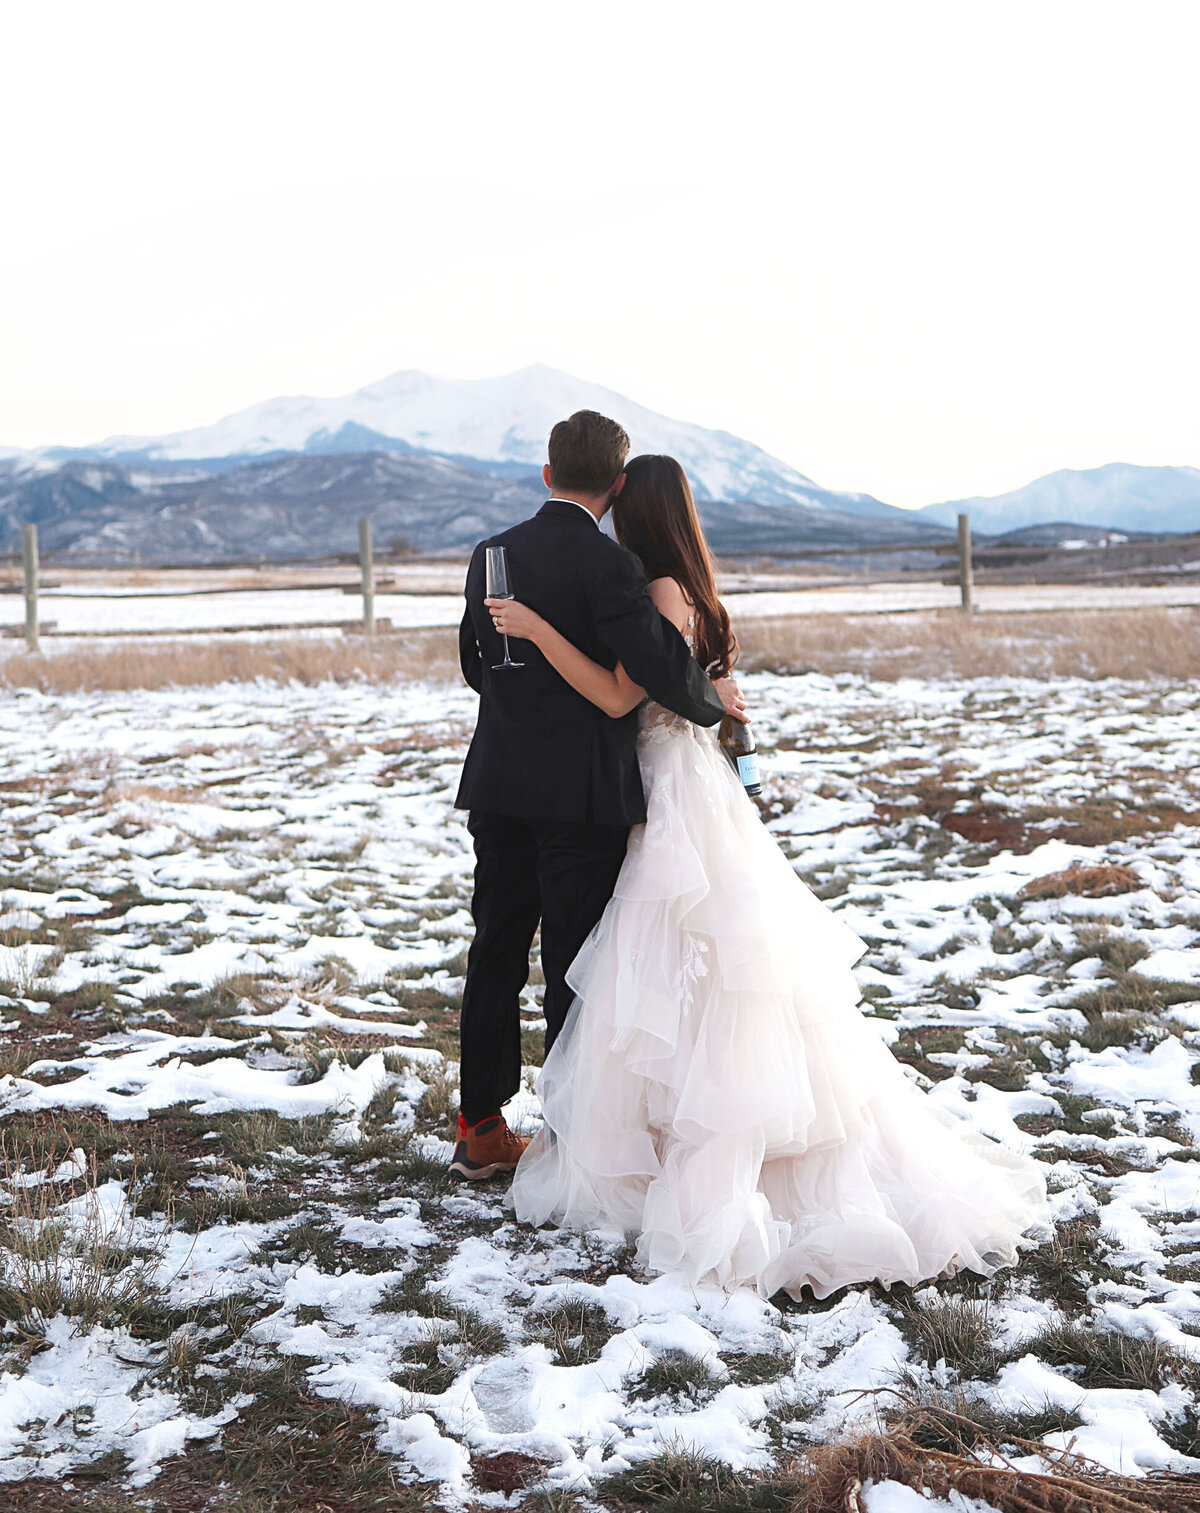 Gorgeous photo of a young bride and groom, embracing looking at the mountains together.